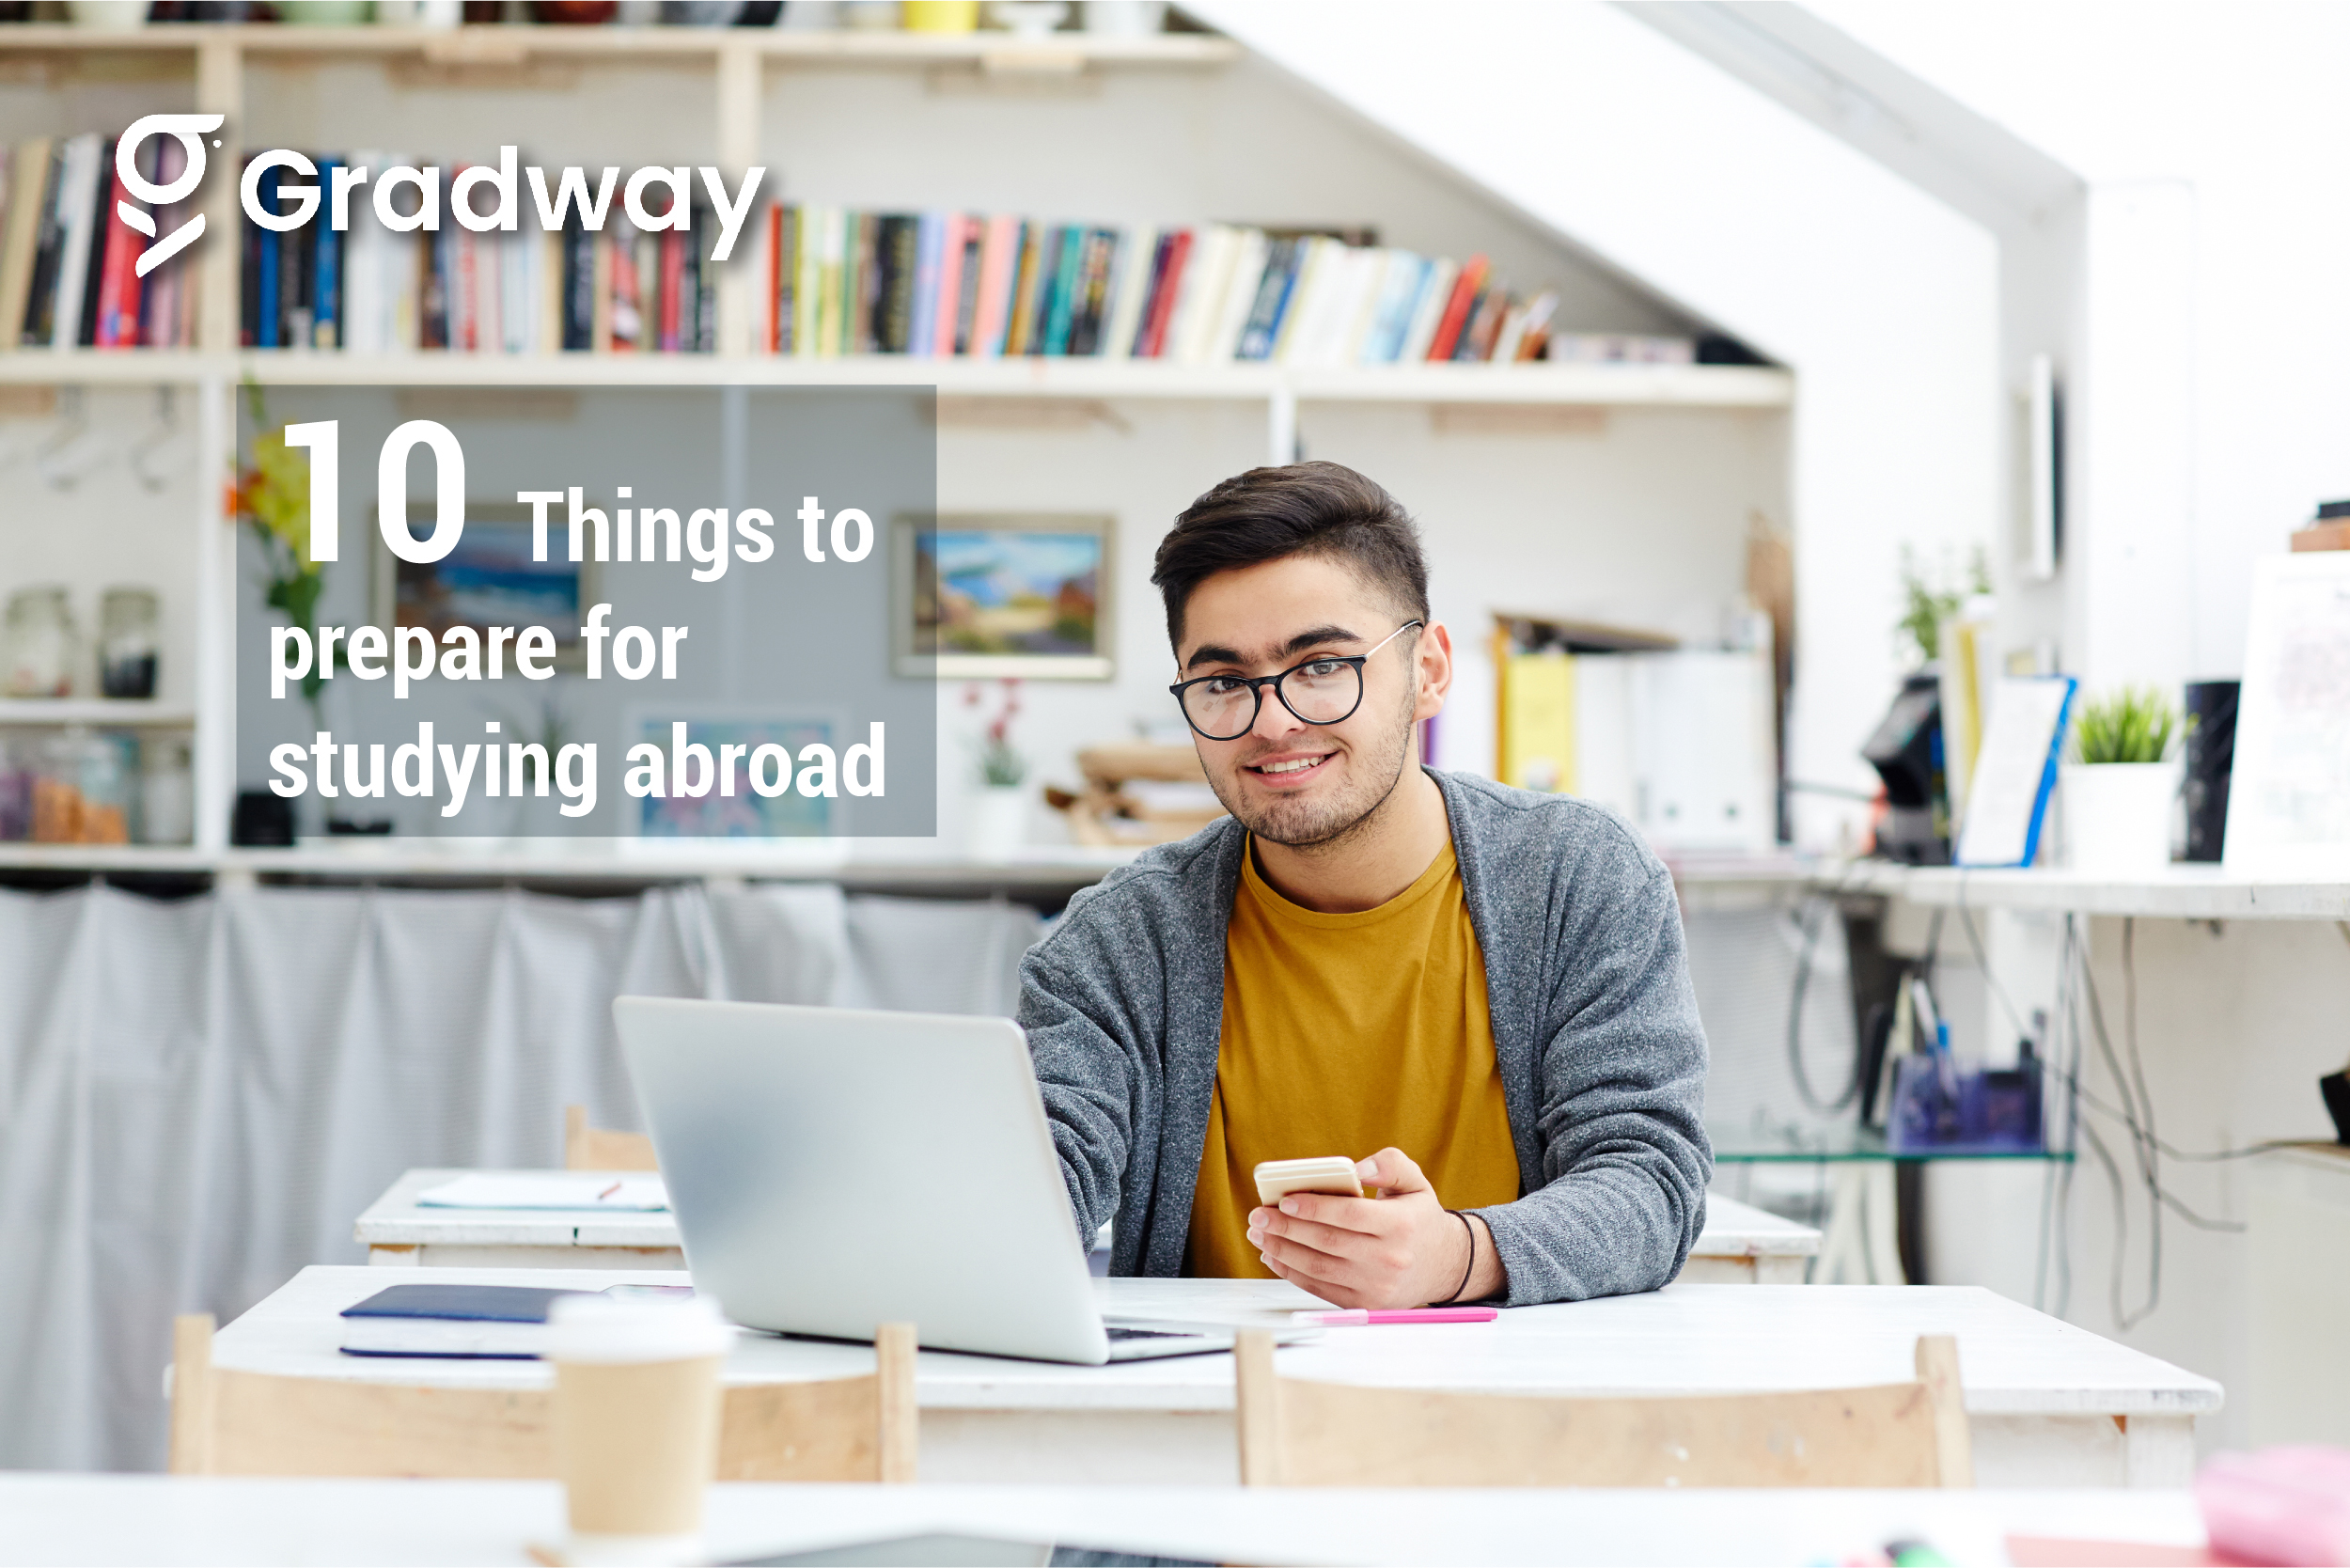 20 Things to do before travelling to study abroad | Gradway